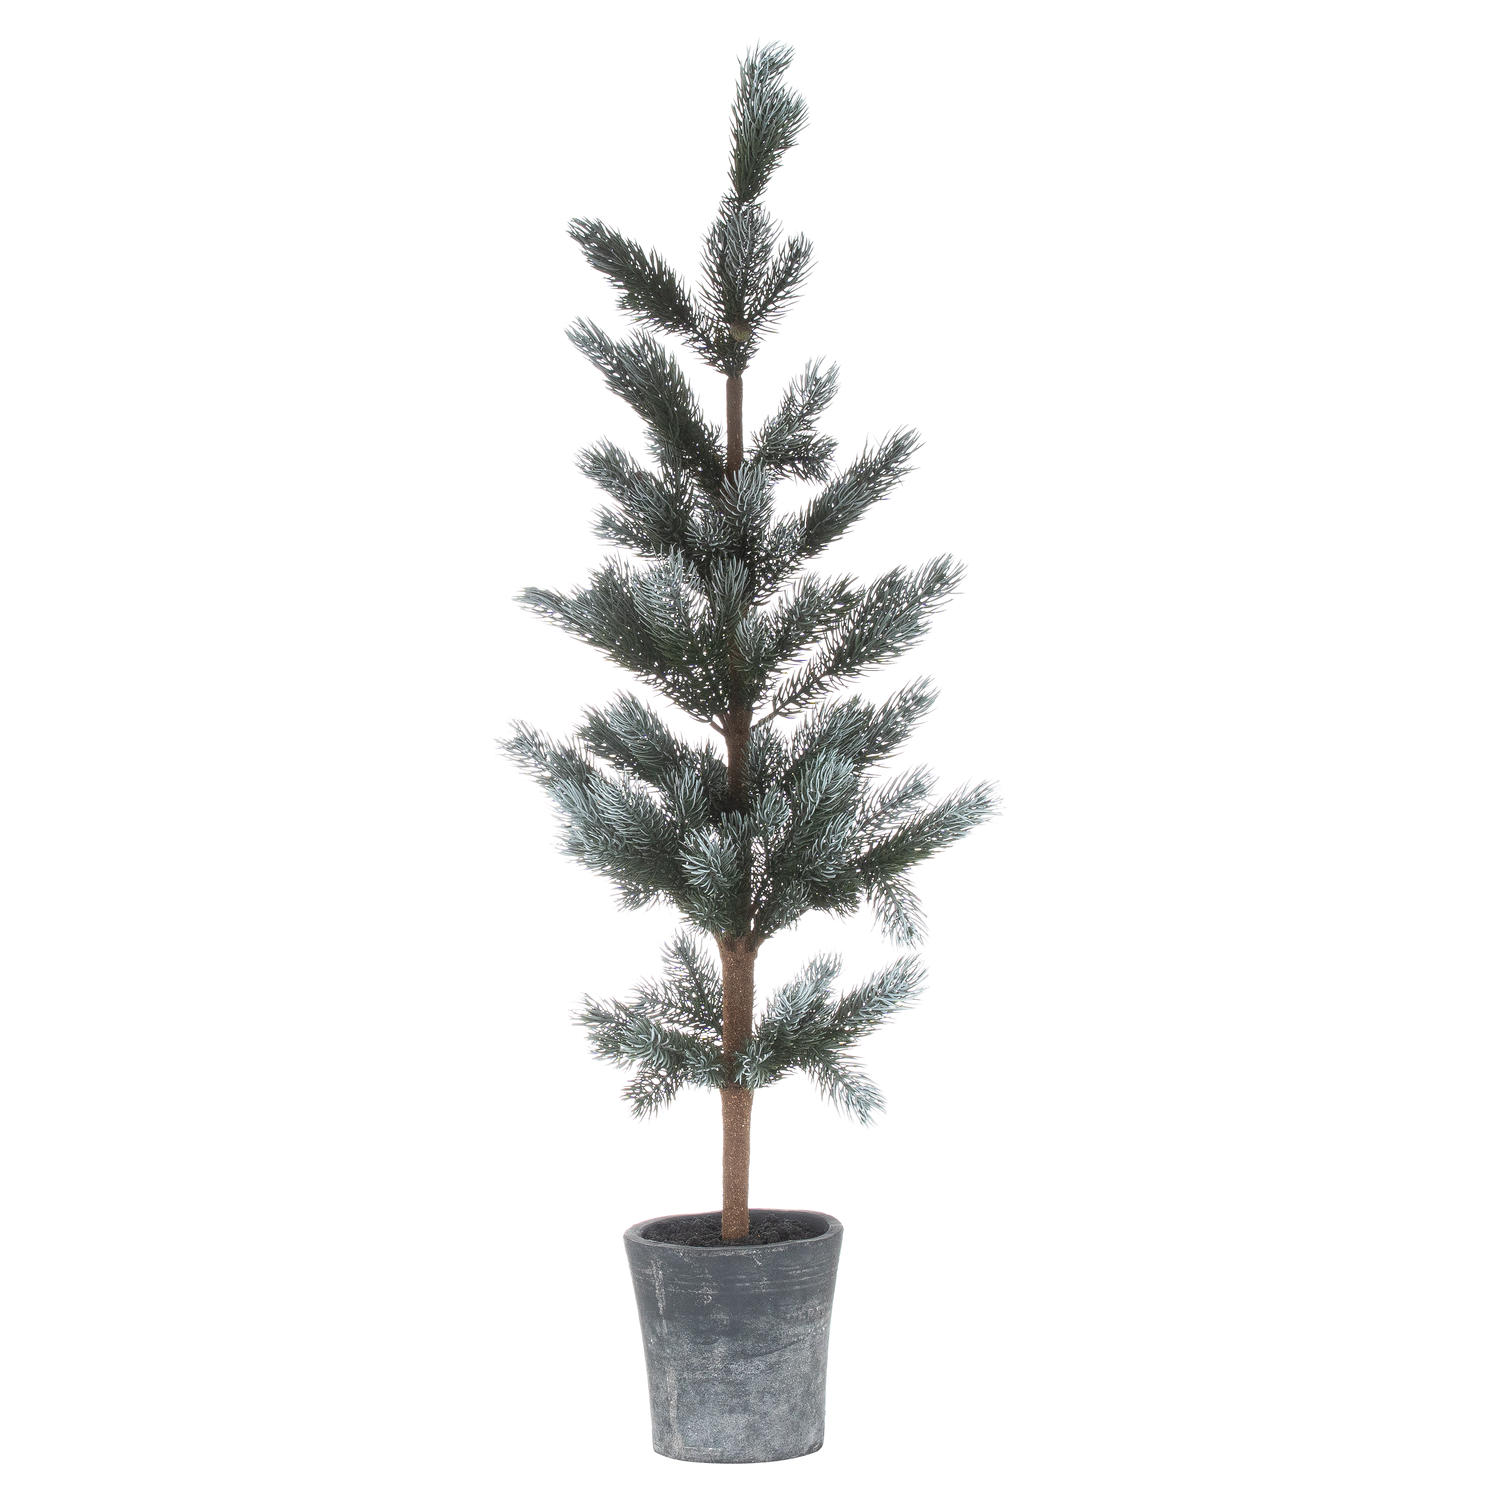 Christmas Fir Tree In Stone Pot - Image 1